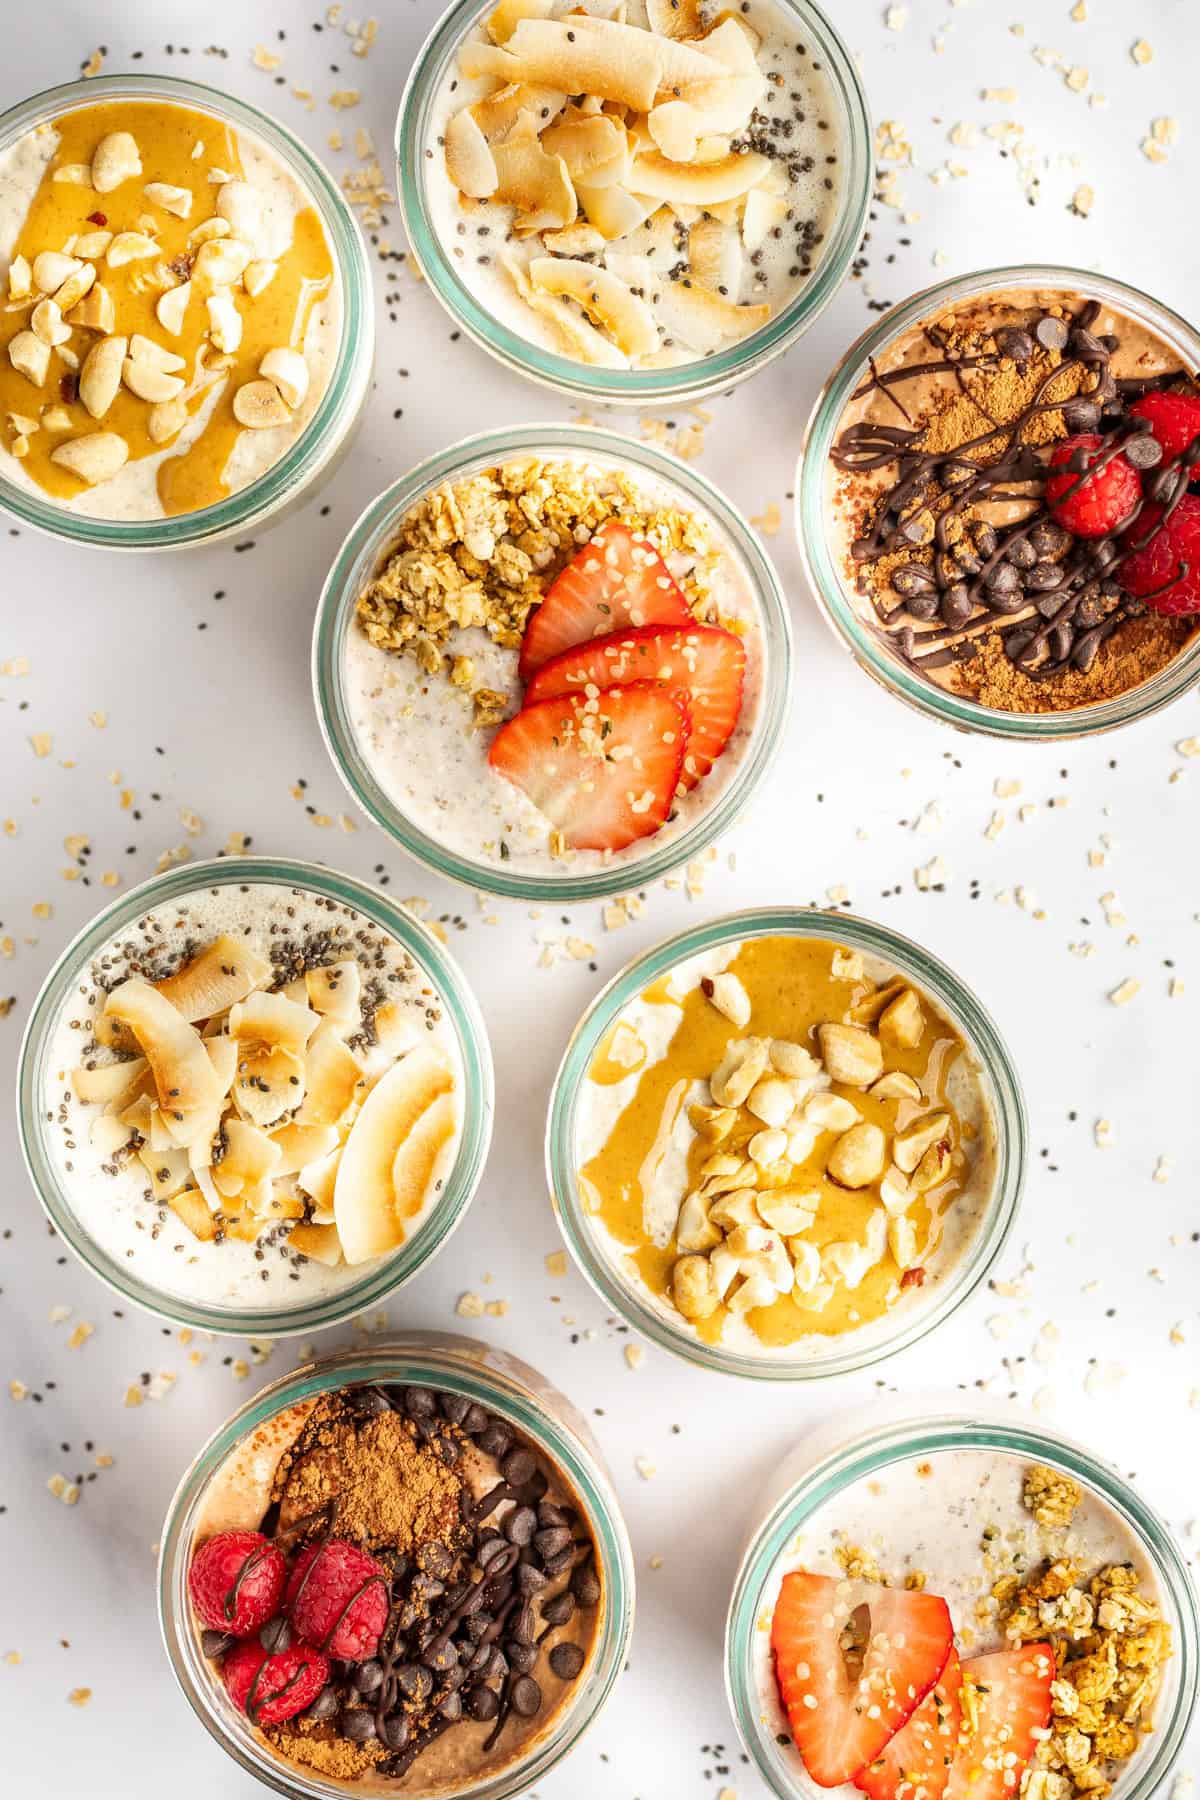 Overhead view of seven jars filled with different varieties of overnight oats topped with ingredients like strawberries, chocolate chips, chia seeds, coconut flakes, and granola, arranged in a pattern.